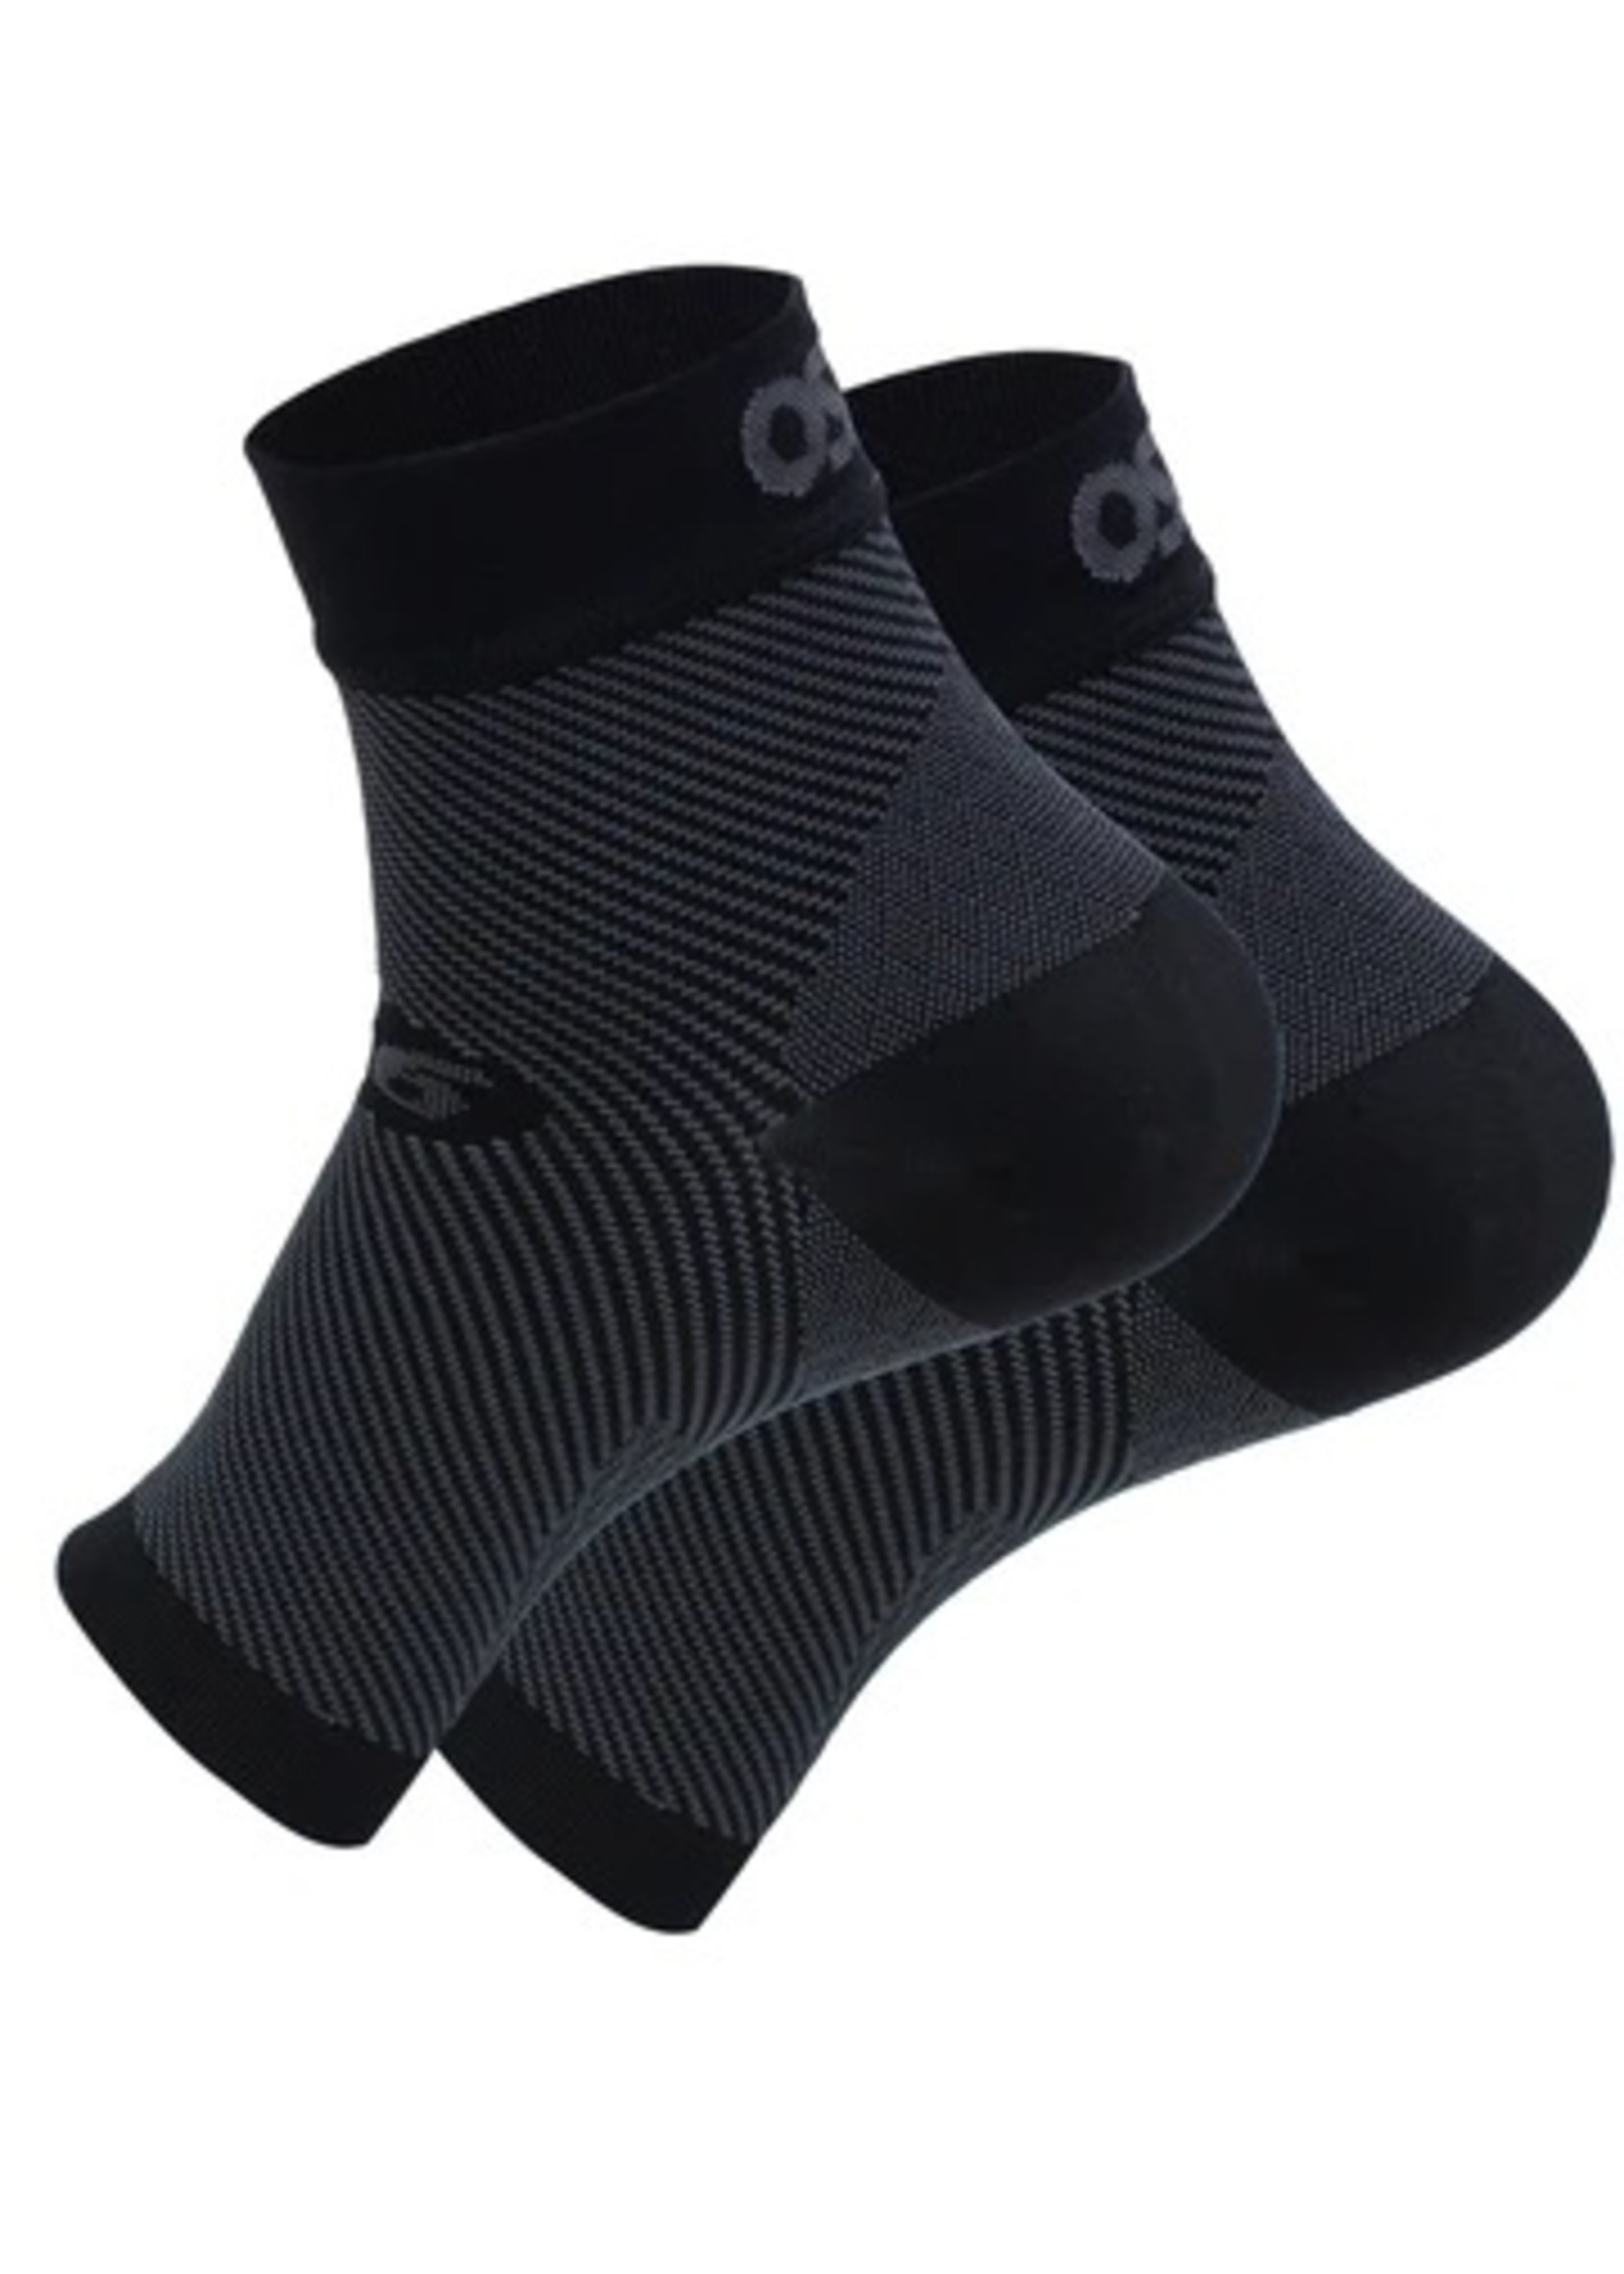 OS1st FS6 RECOVERY FOOT SLEEVE